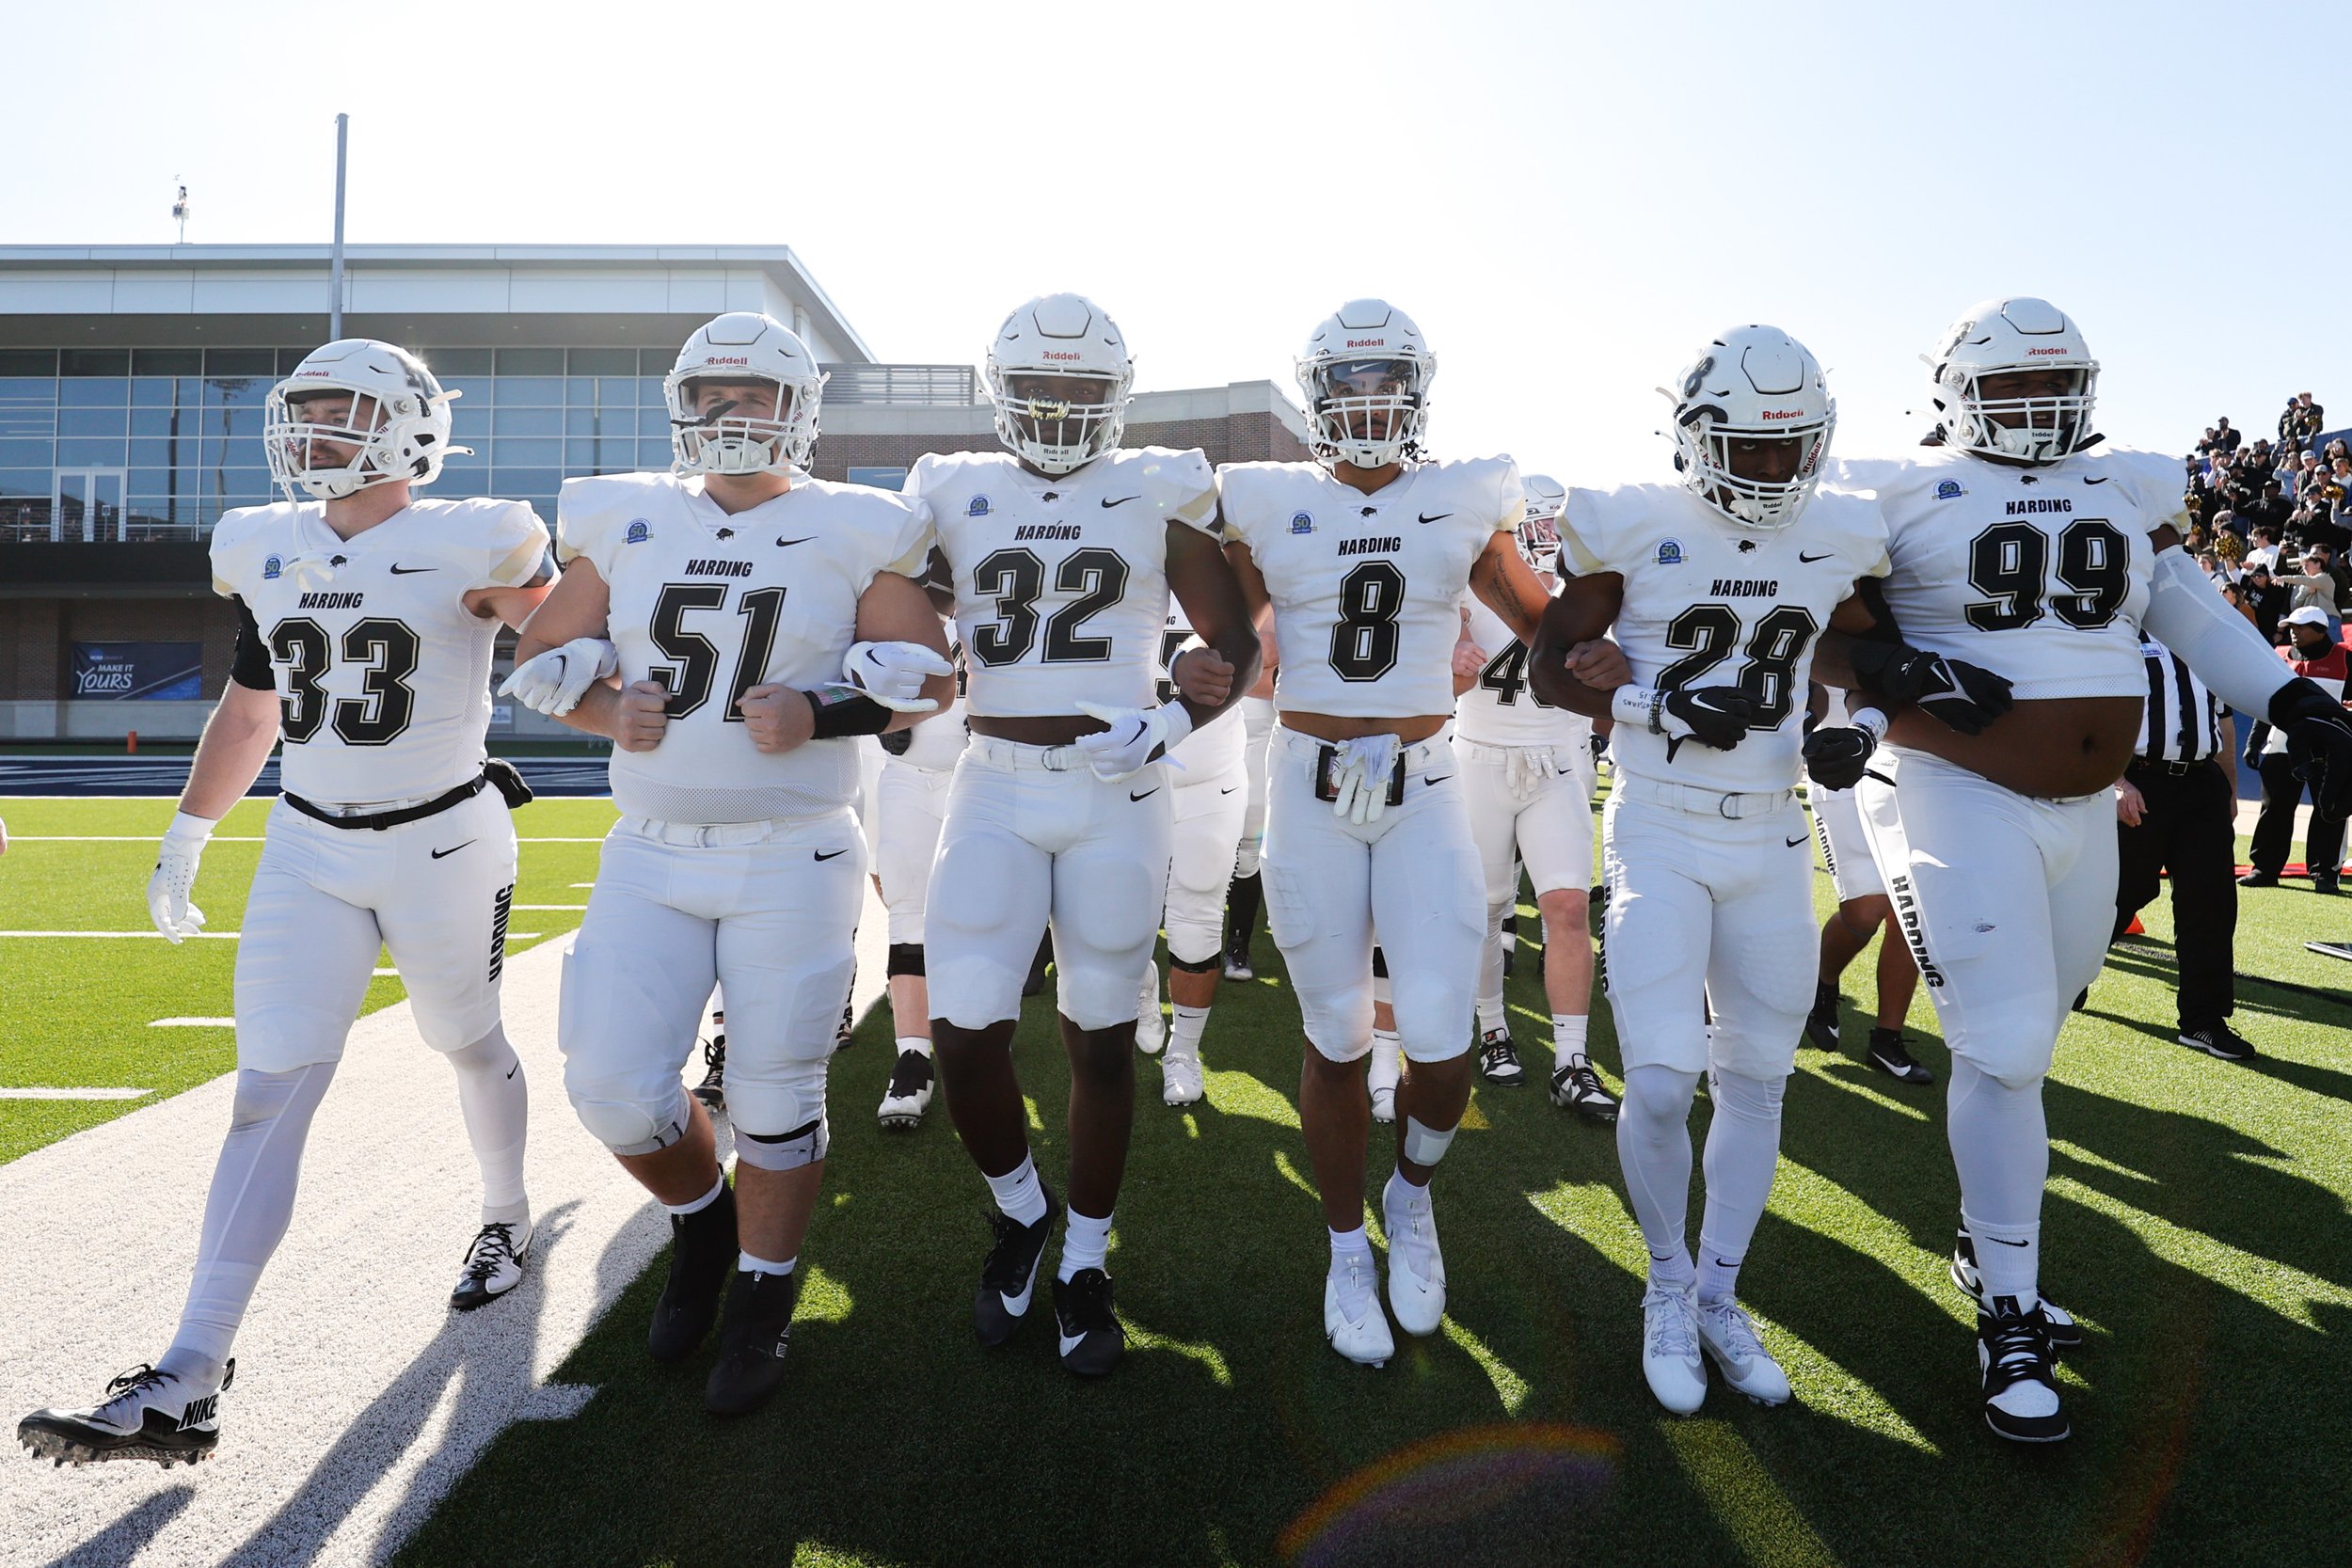  MCKINNEY, TEXAS - DECEMBER 16: Nathaniel Wallace #32 of Harding Bisons with Roland Wallace #8 of Harding Bisons and teammates take the field before the game against the Colorado School of Mines Orediggers during the Division II Football Championship